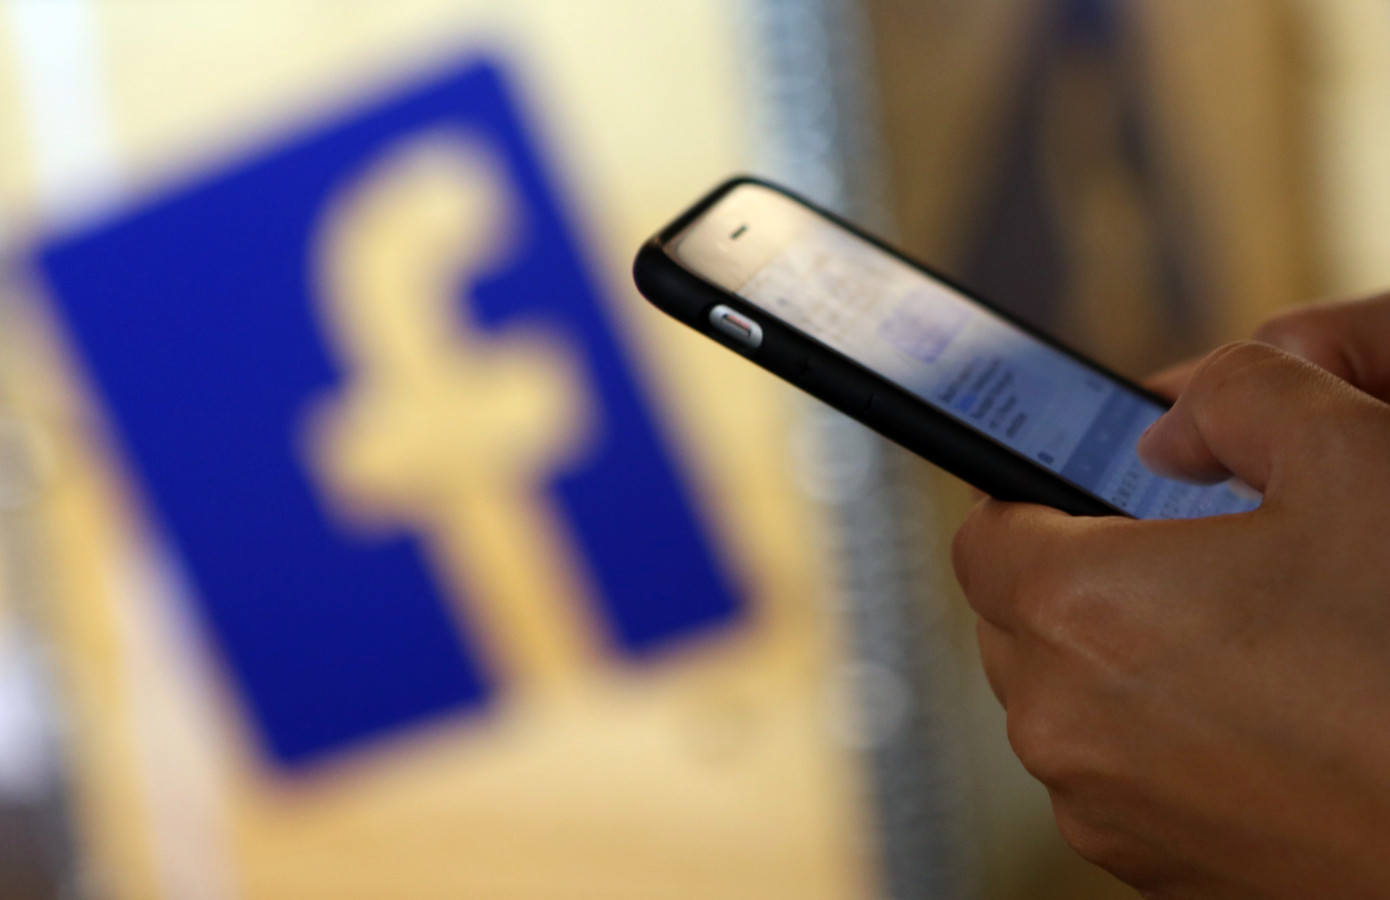 Hundreds of Millions of Phone Numbers From Facebook Accounts Leaked Online